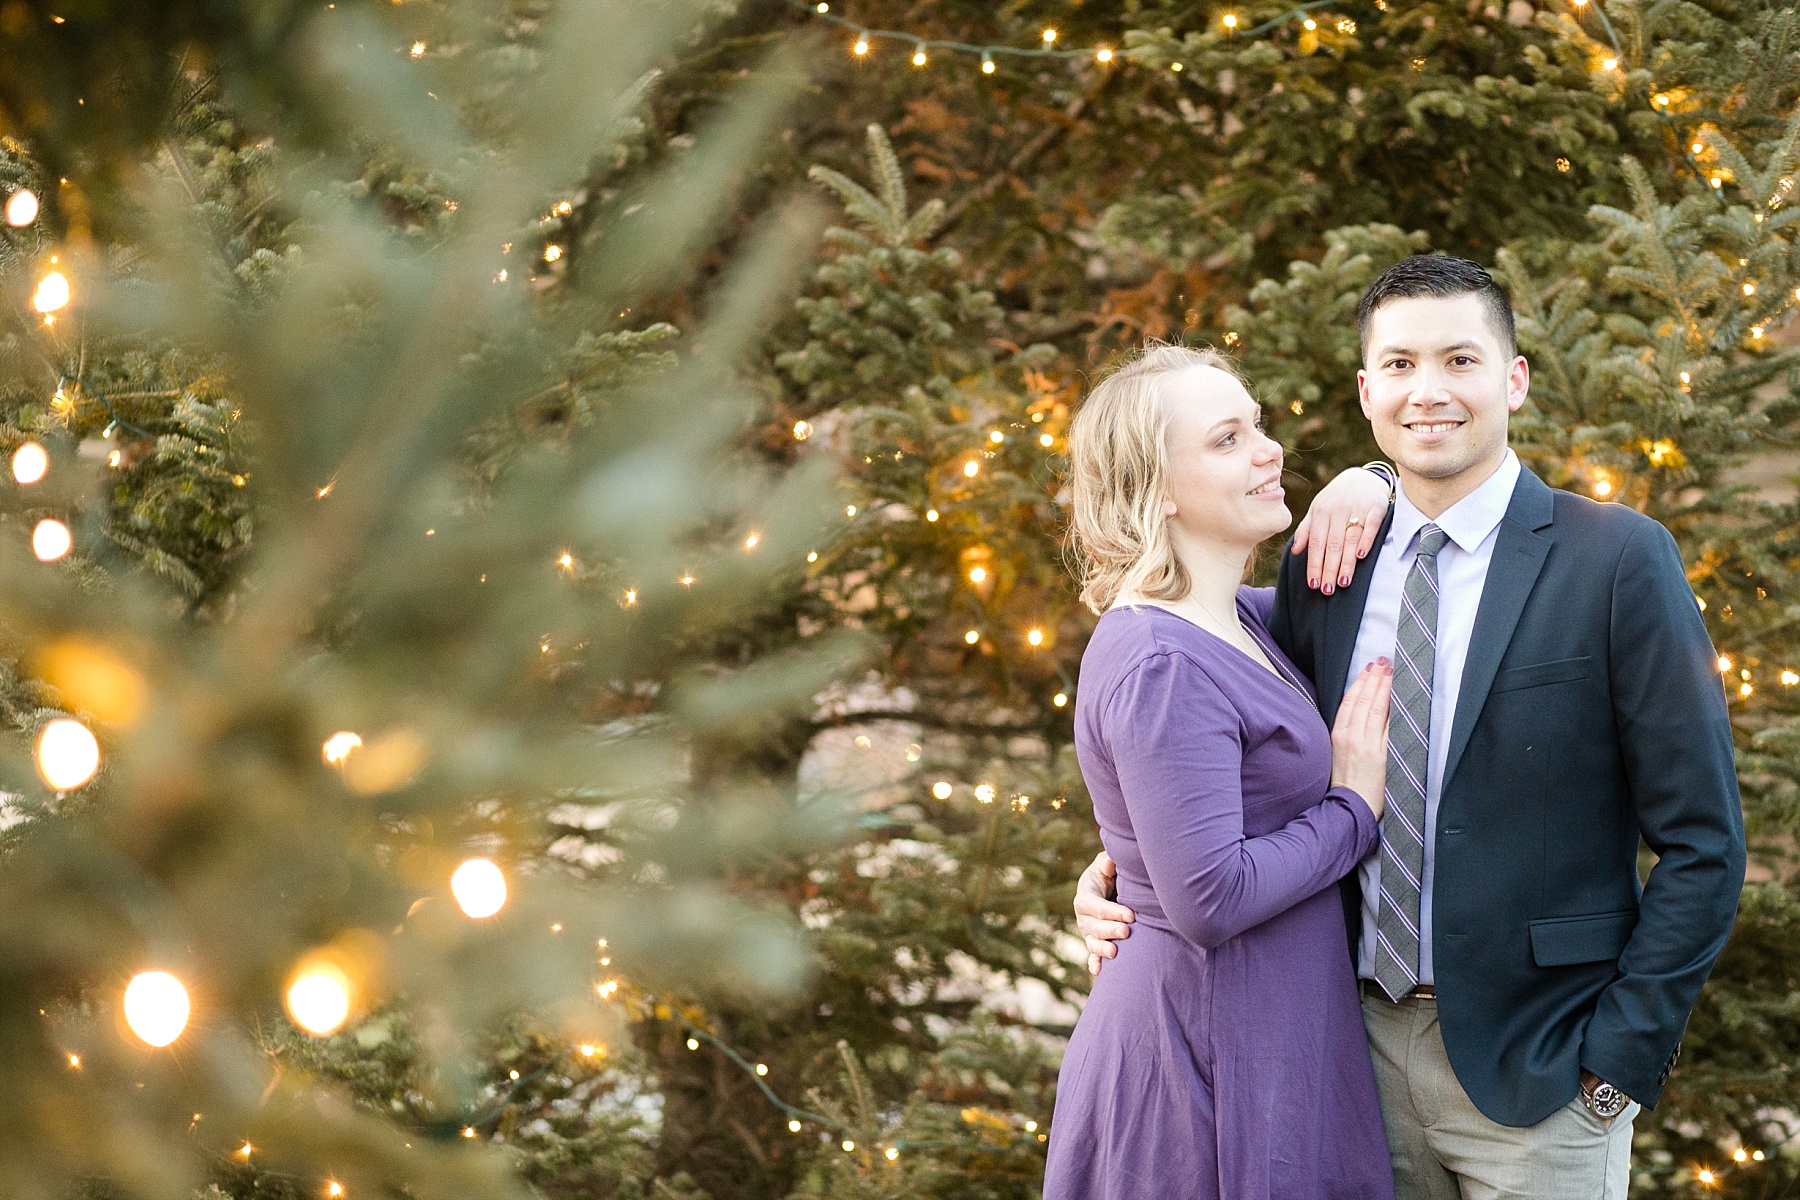 Couple in pine trees with Christmas lights.